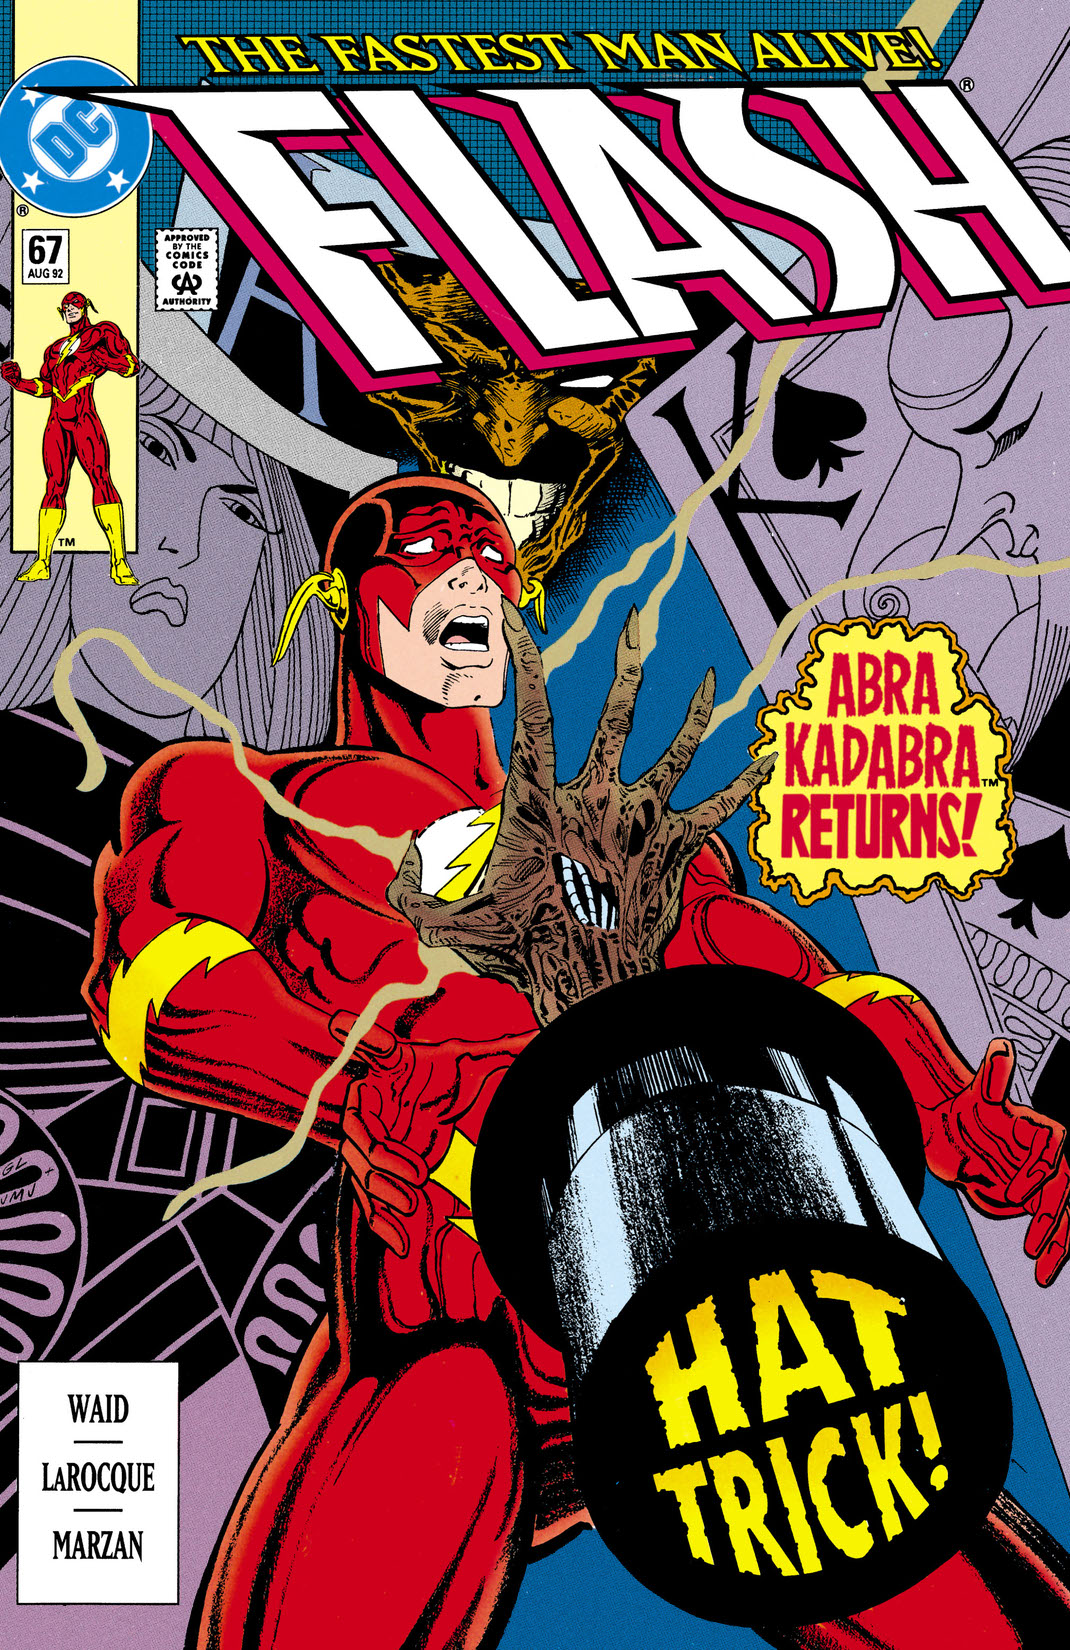 The Flash (1987-) #67 preview images